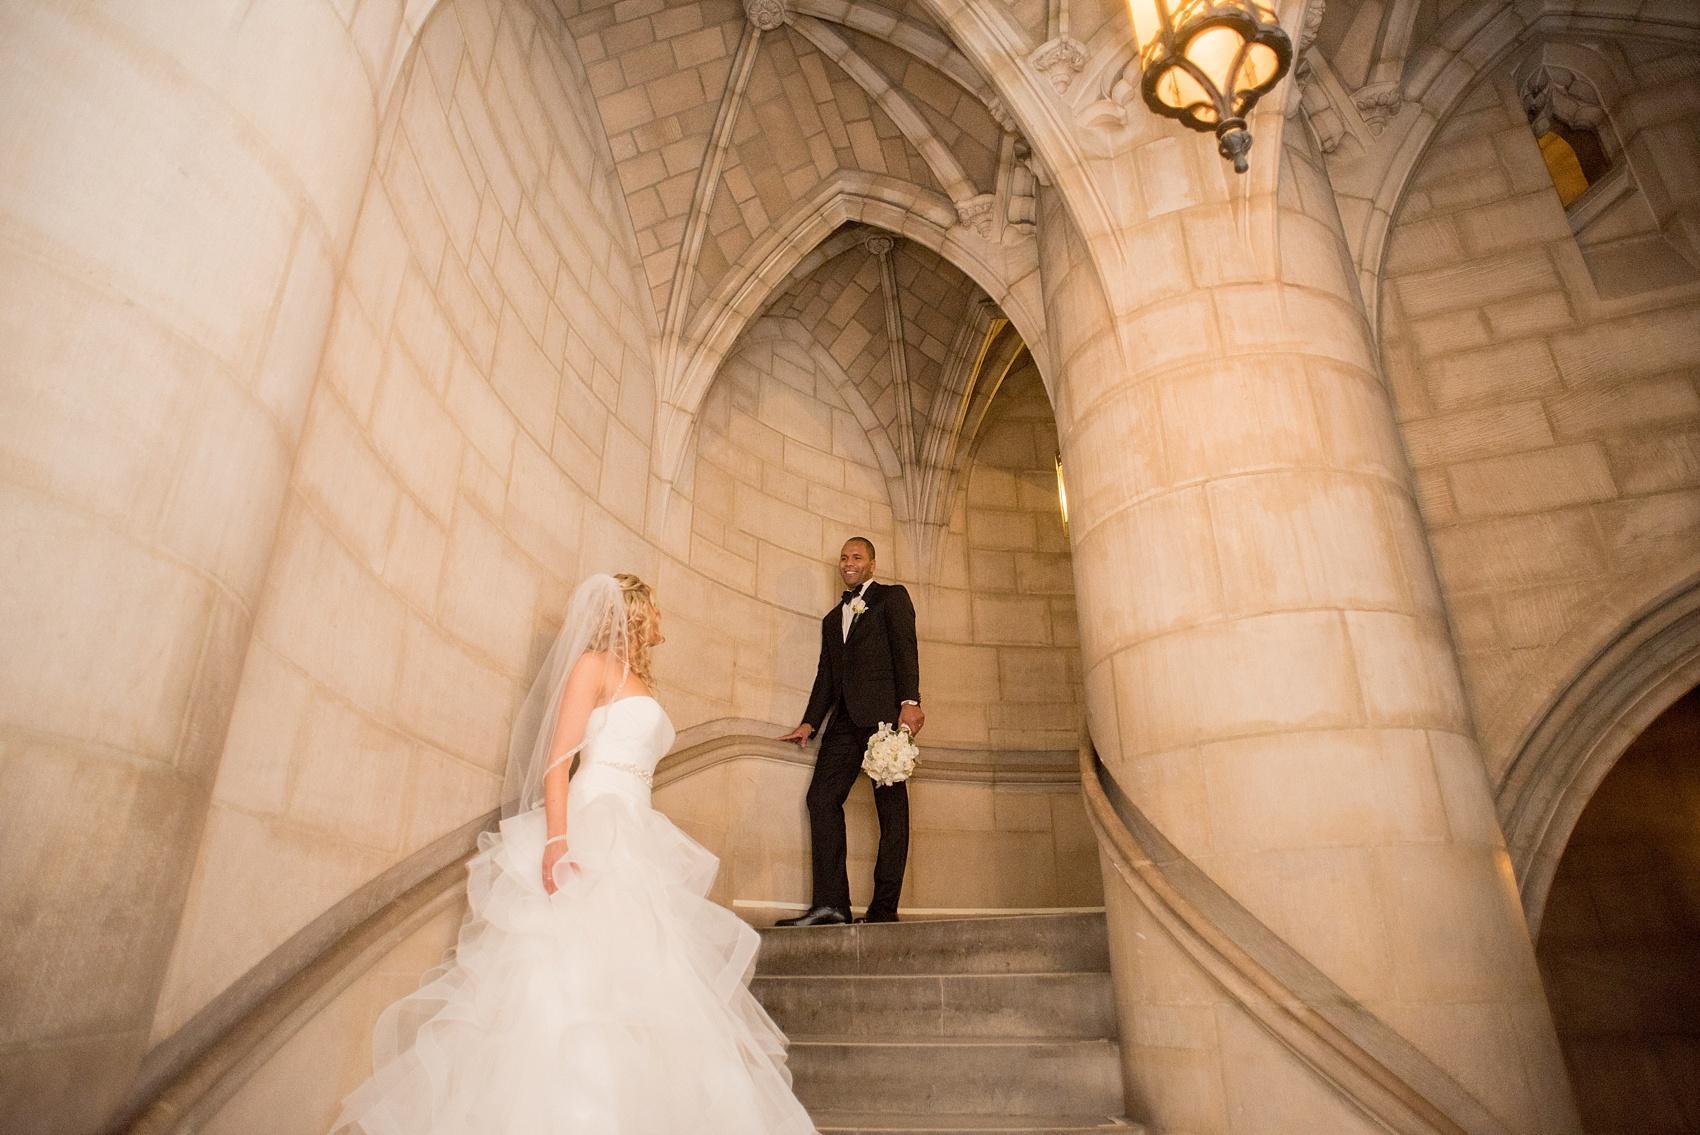 Bride and groom portrait photos. Image by Mikkel Paige Photography for a Riverside Church wedding in NYC on the Upper West Side.